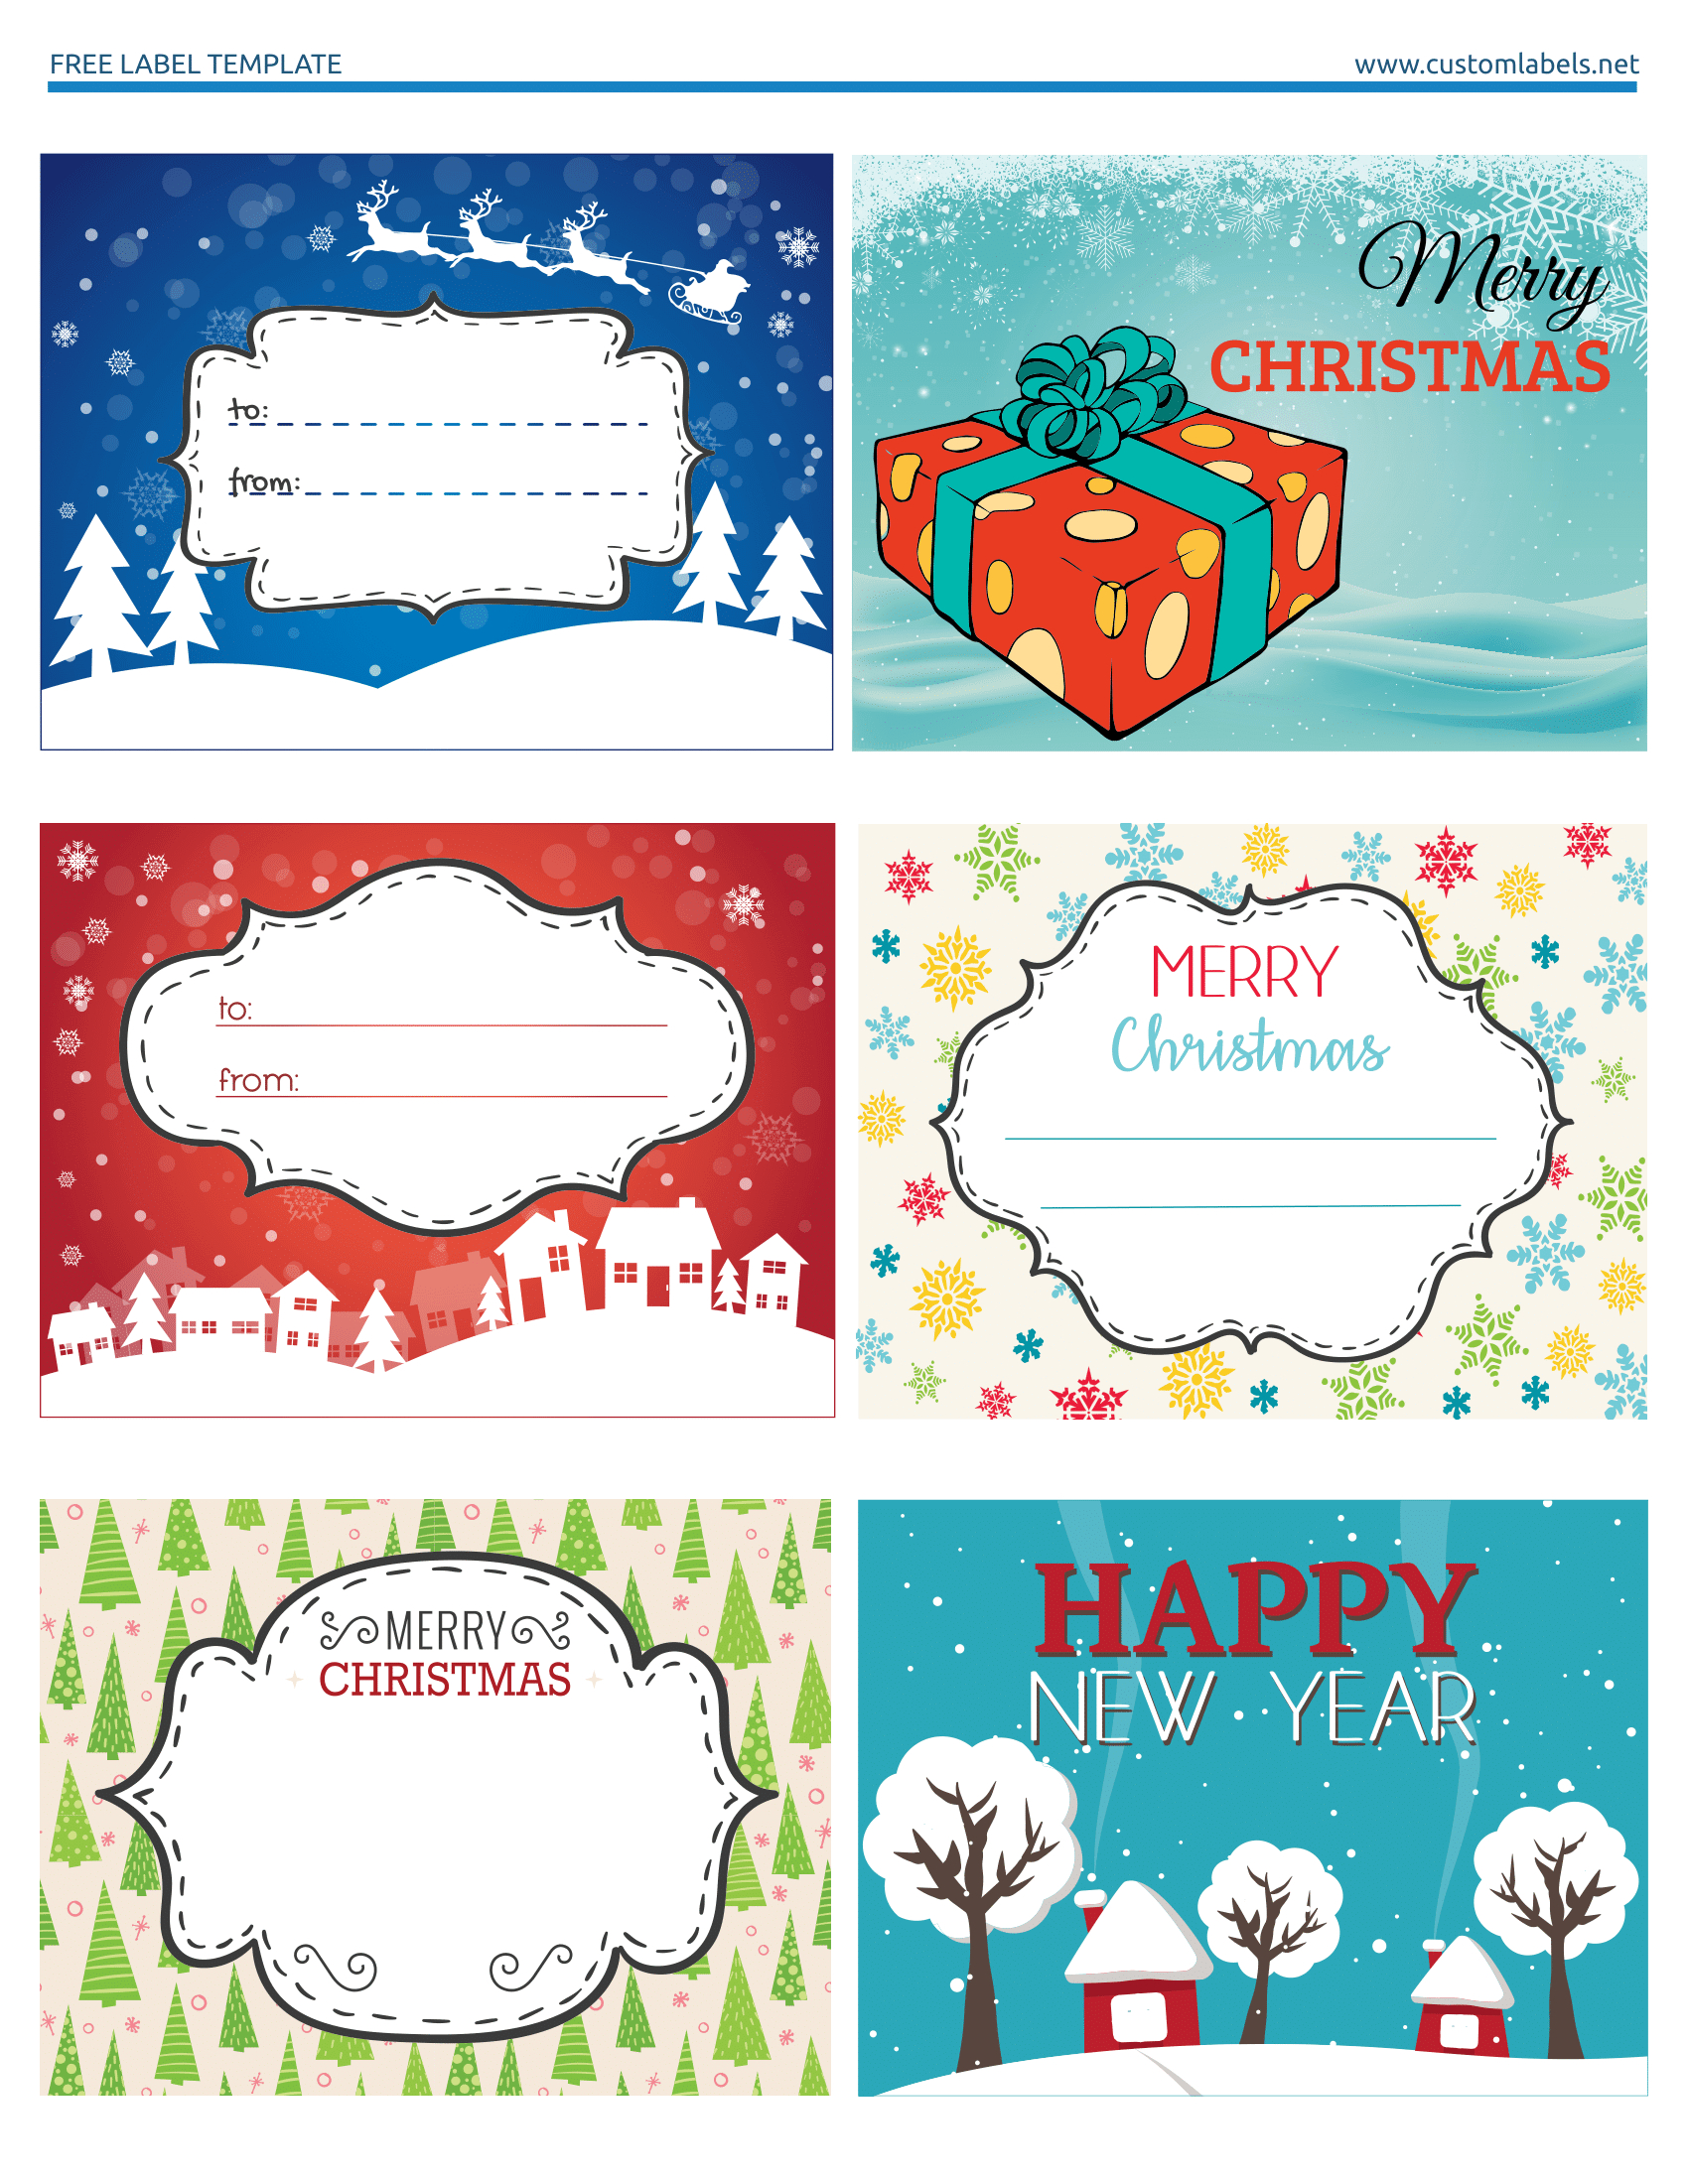 006 Template Ideas Fun Andolorfulhristmas Labels Free In Free Label Templates For Word